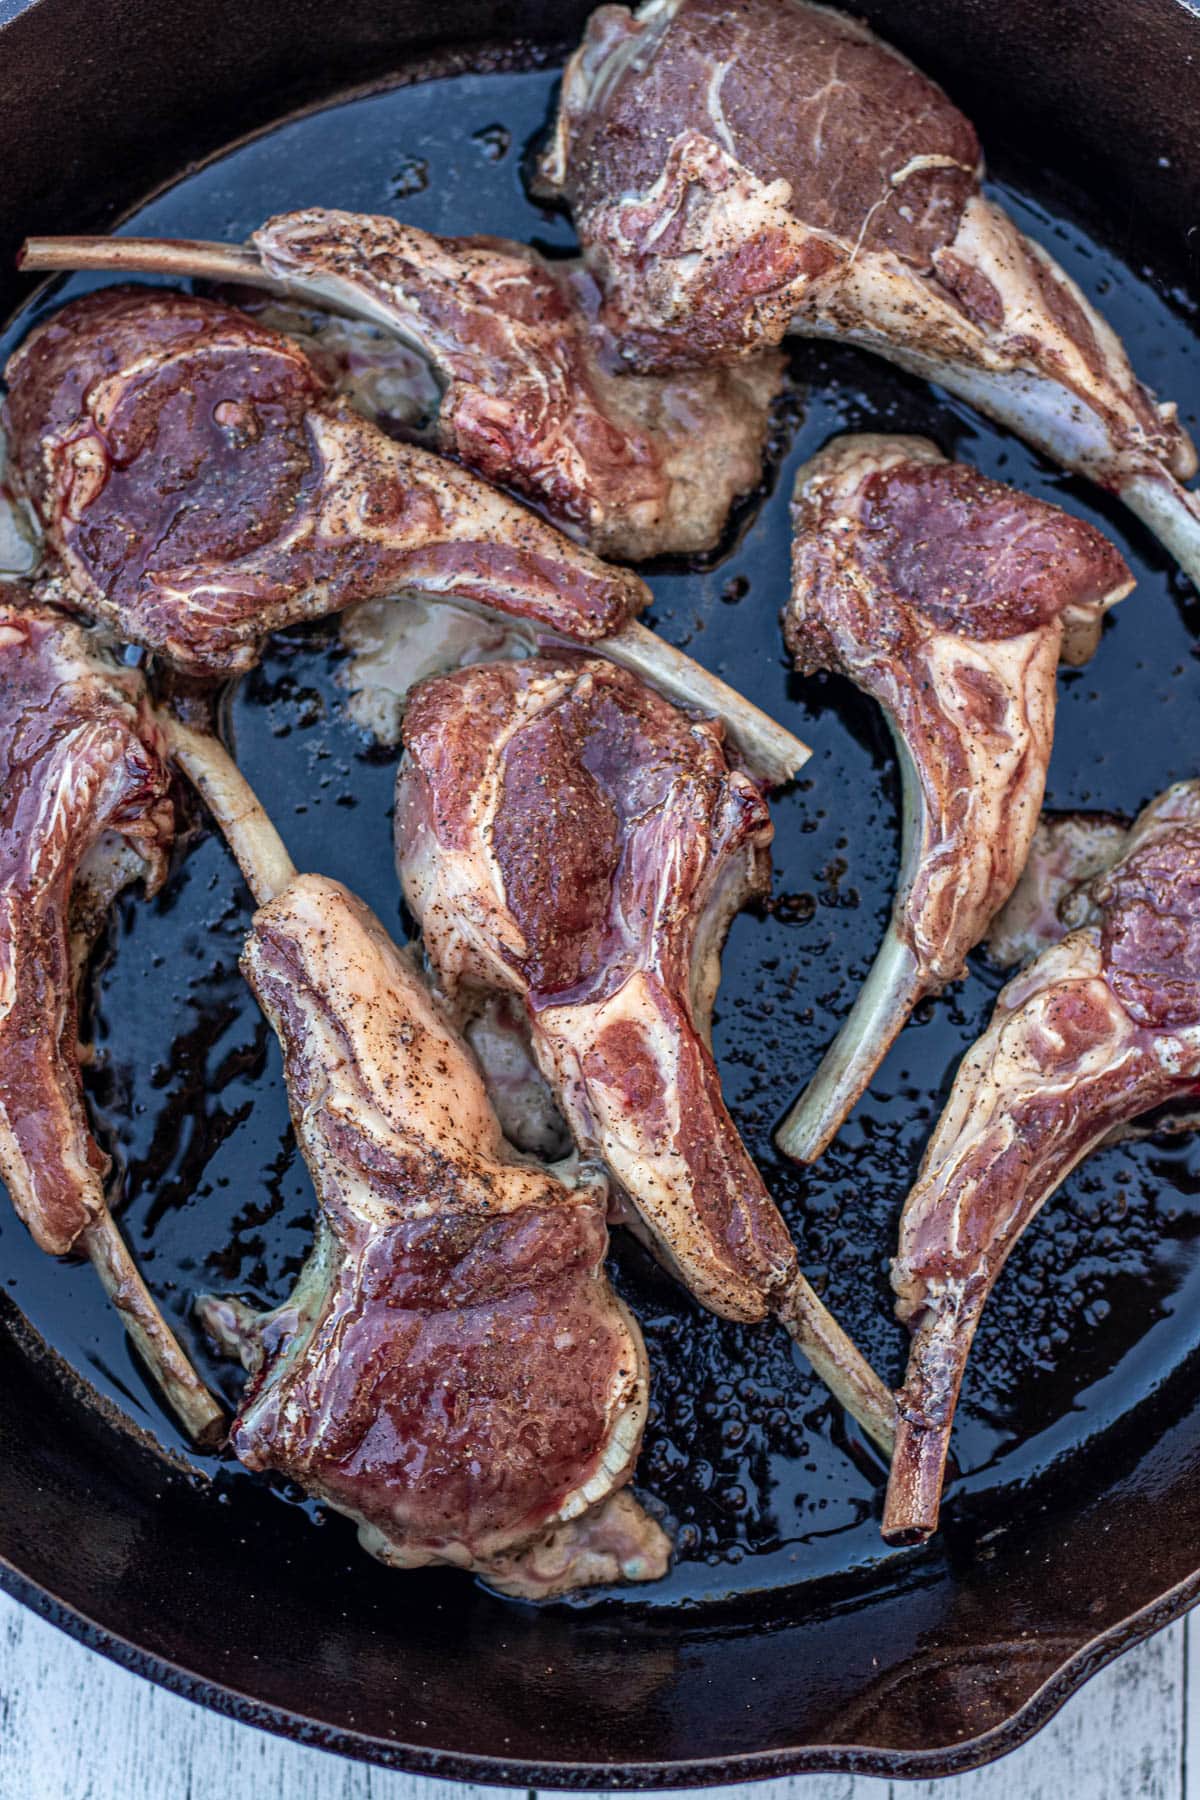 Lamb chops added to hot cast iron skillet.